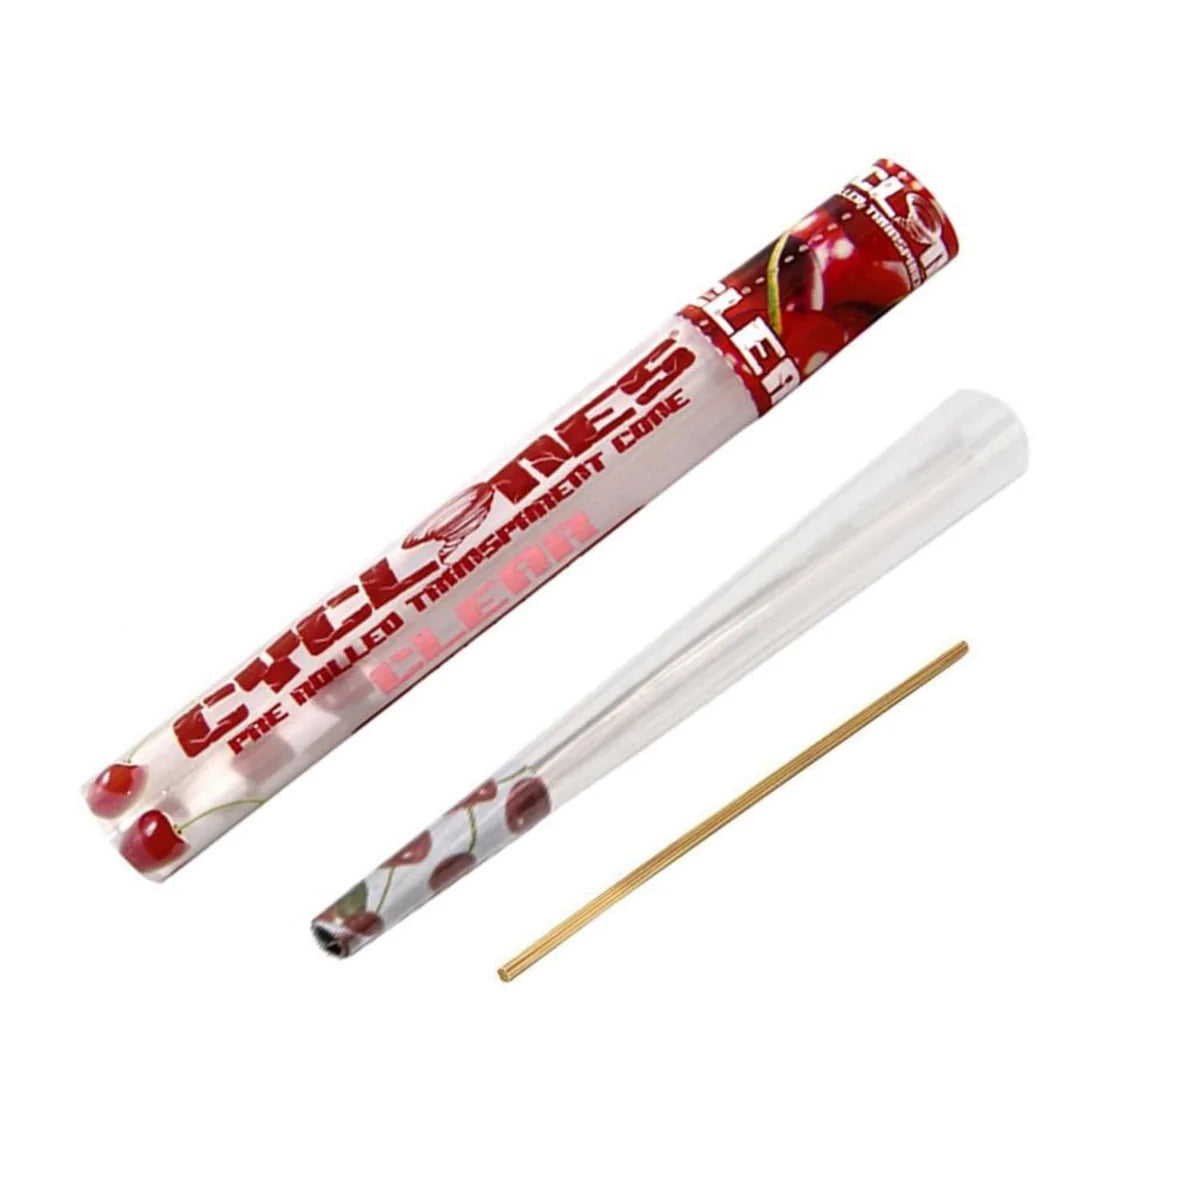 Buy Cyclones Flavored Pre-Rolled Transparent Cone Cherry flavor at Highjack India